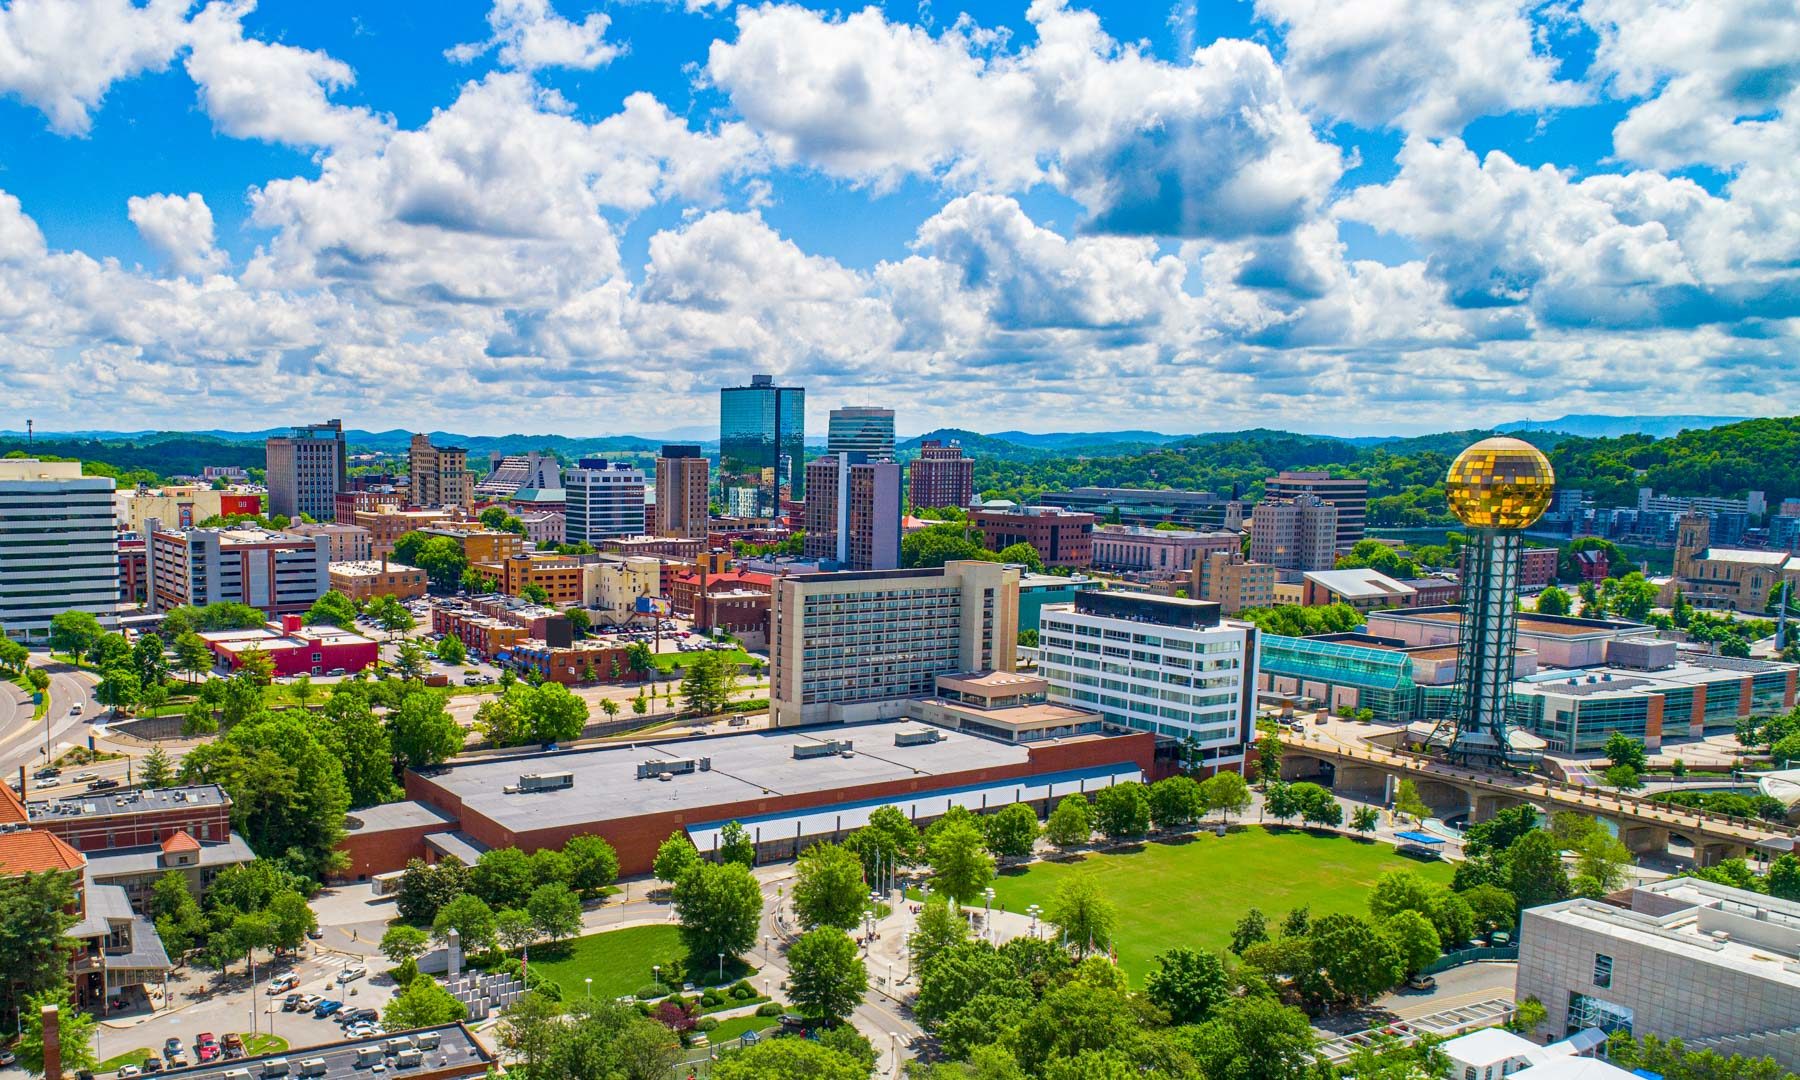 The Best Things to do in Knoxville, Tennessee